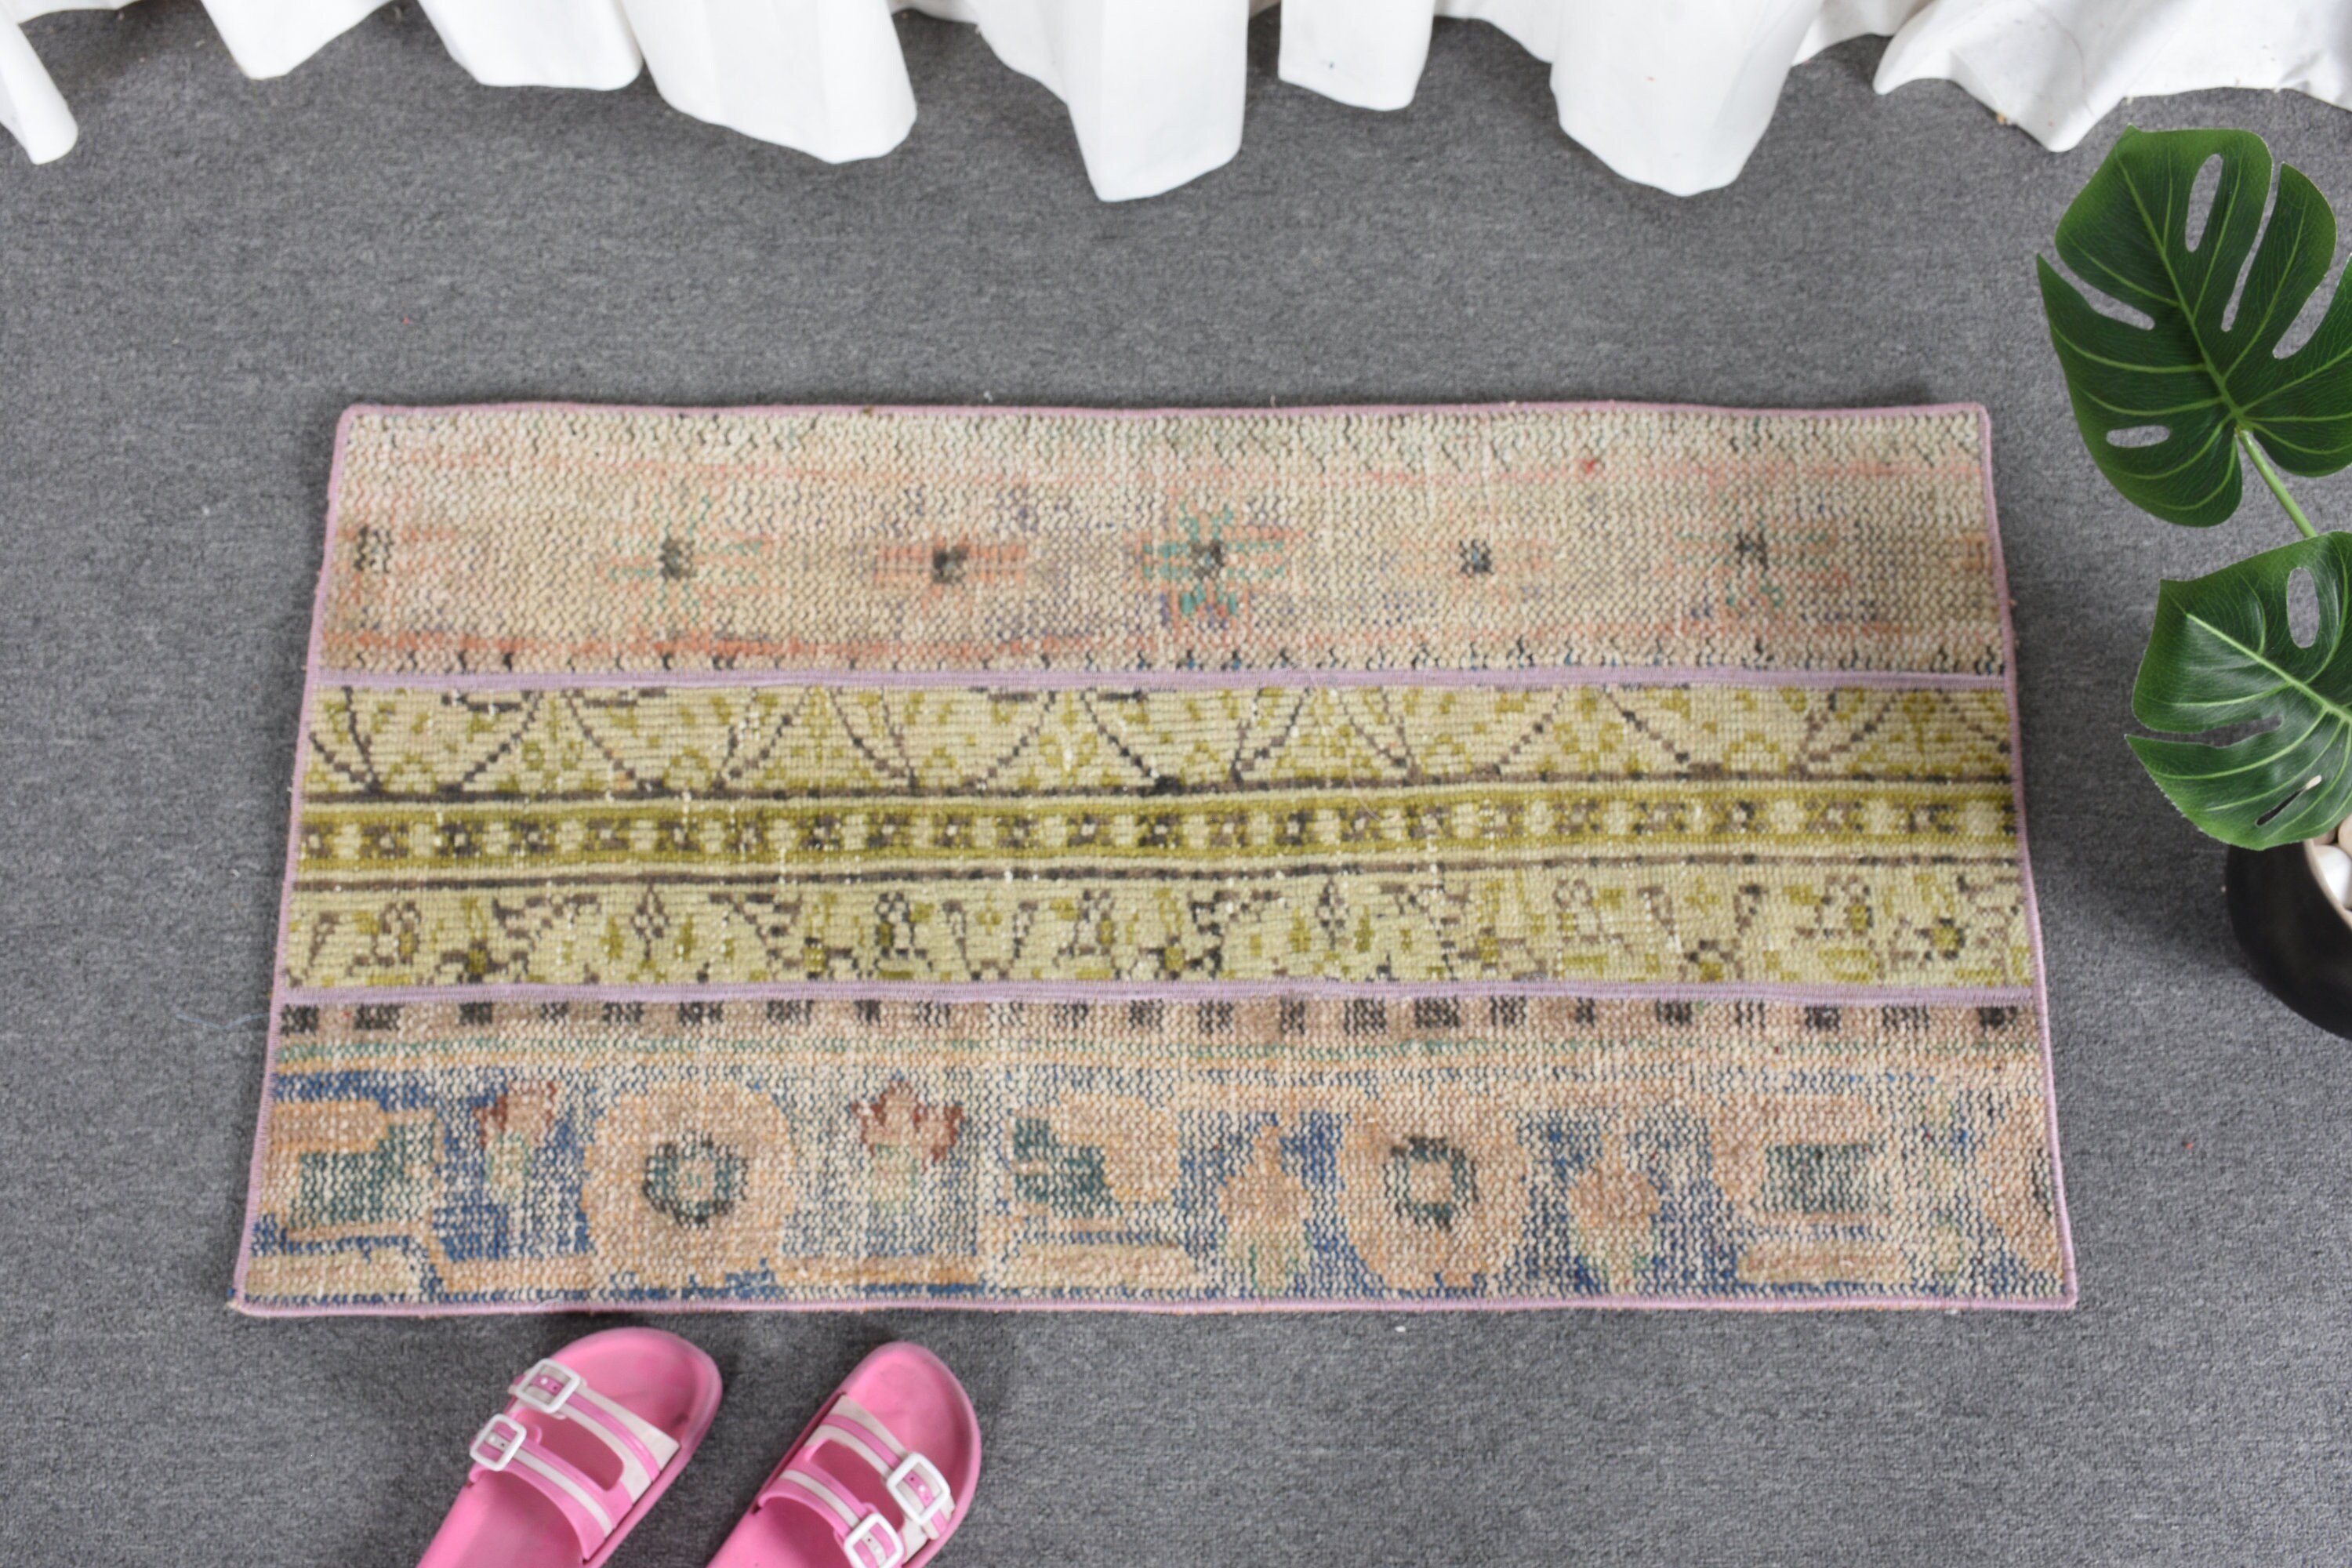 Turkish Rug, Door Mat Rug, Pink Wool Rugs, Vintage Rug, Rugs for Entry, Wall Hanging Rug, Moroccan Rug, 1.7x3.1 ft Small Rug, Kitchen Rugs